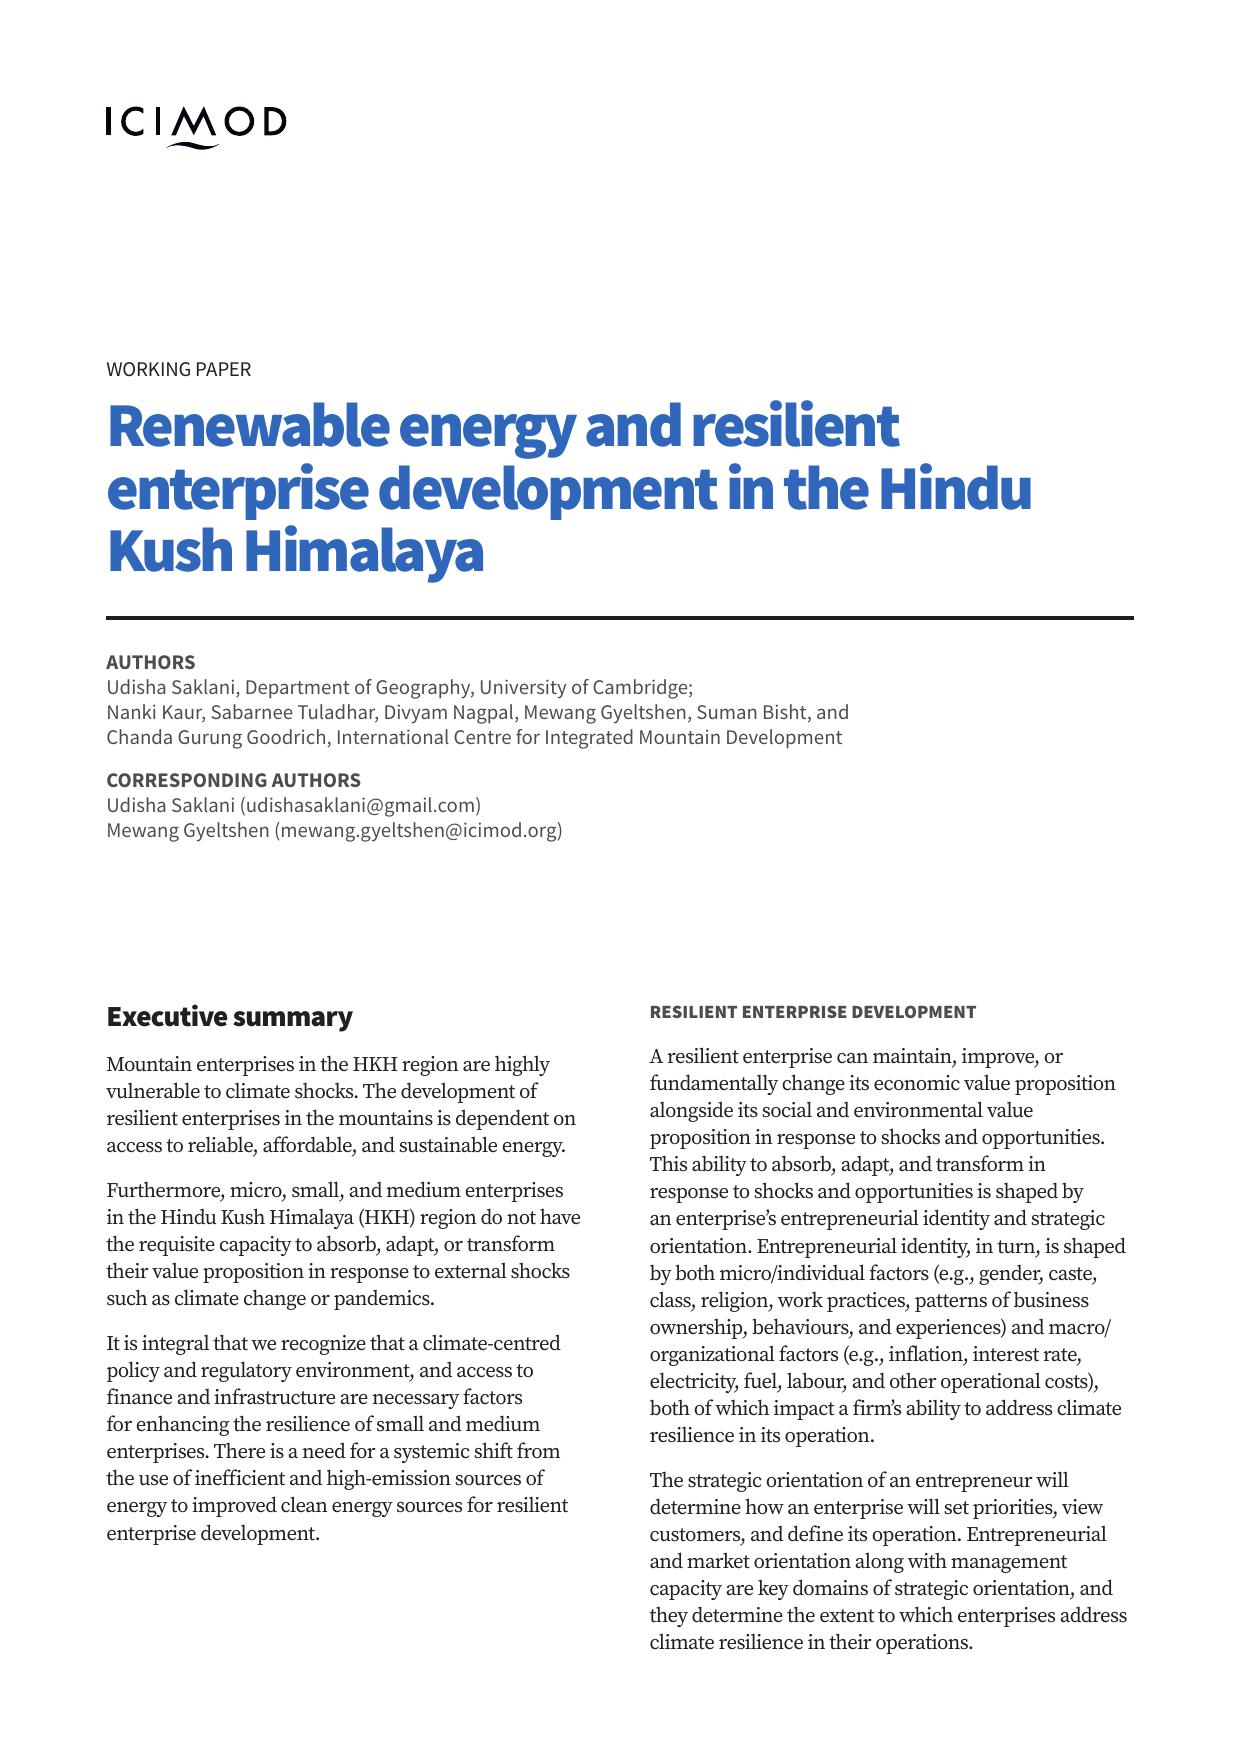 Renewable energy and resilient enterprise development in the Hindu Kush Himalaya - working paper